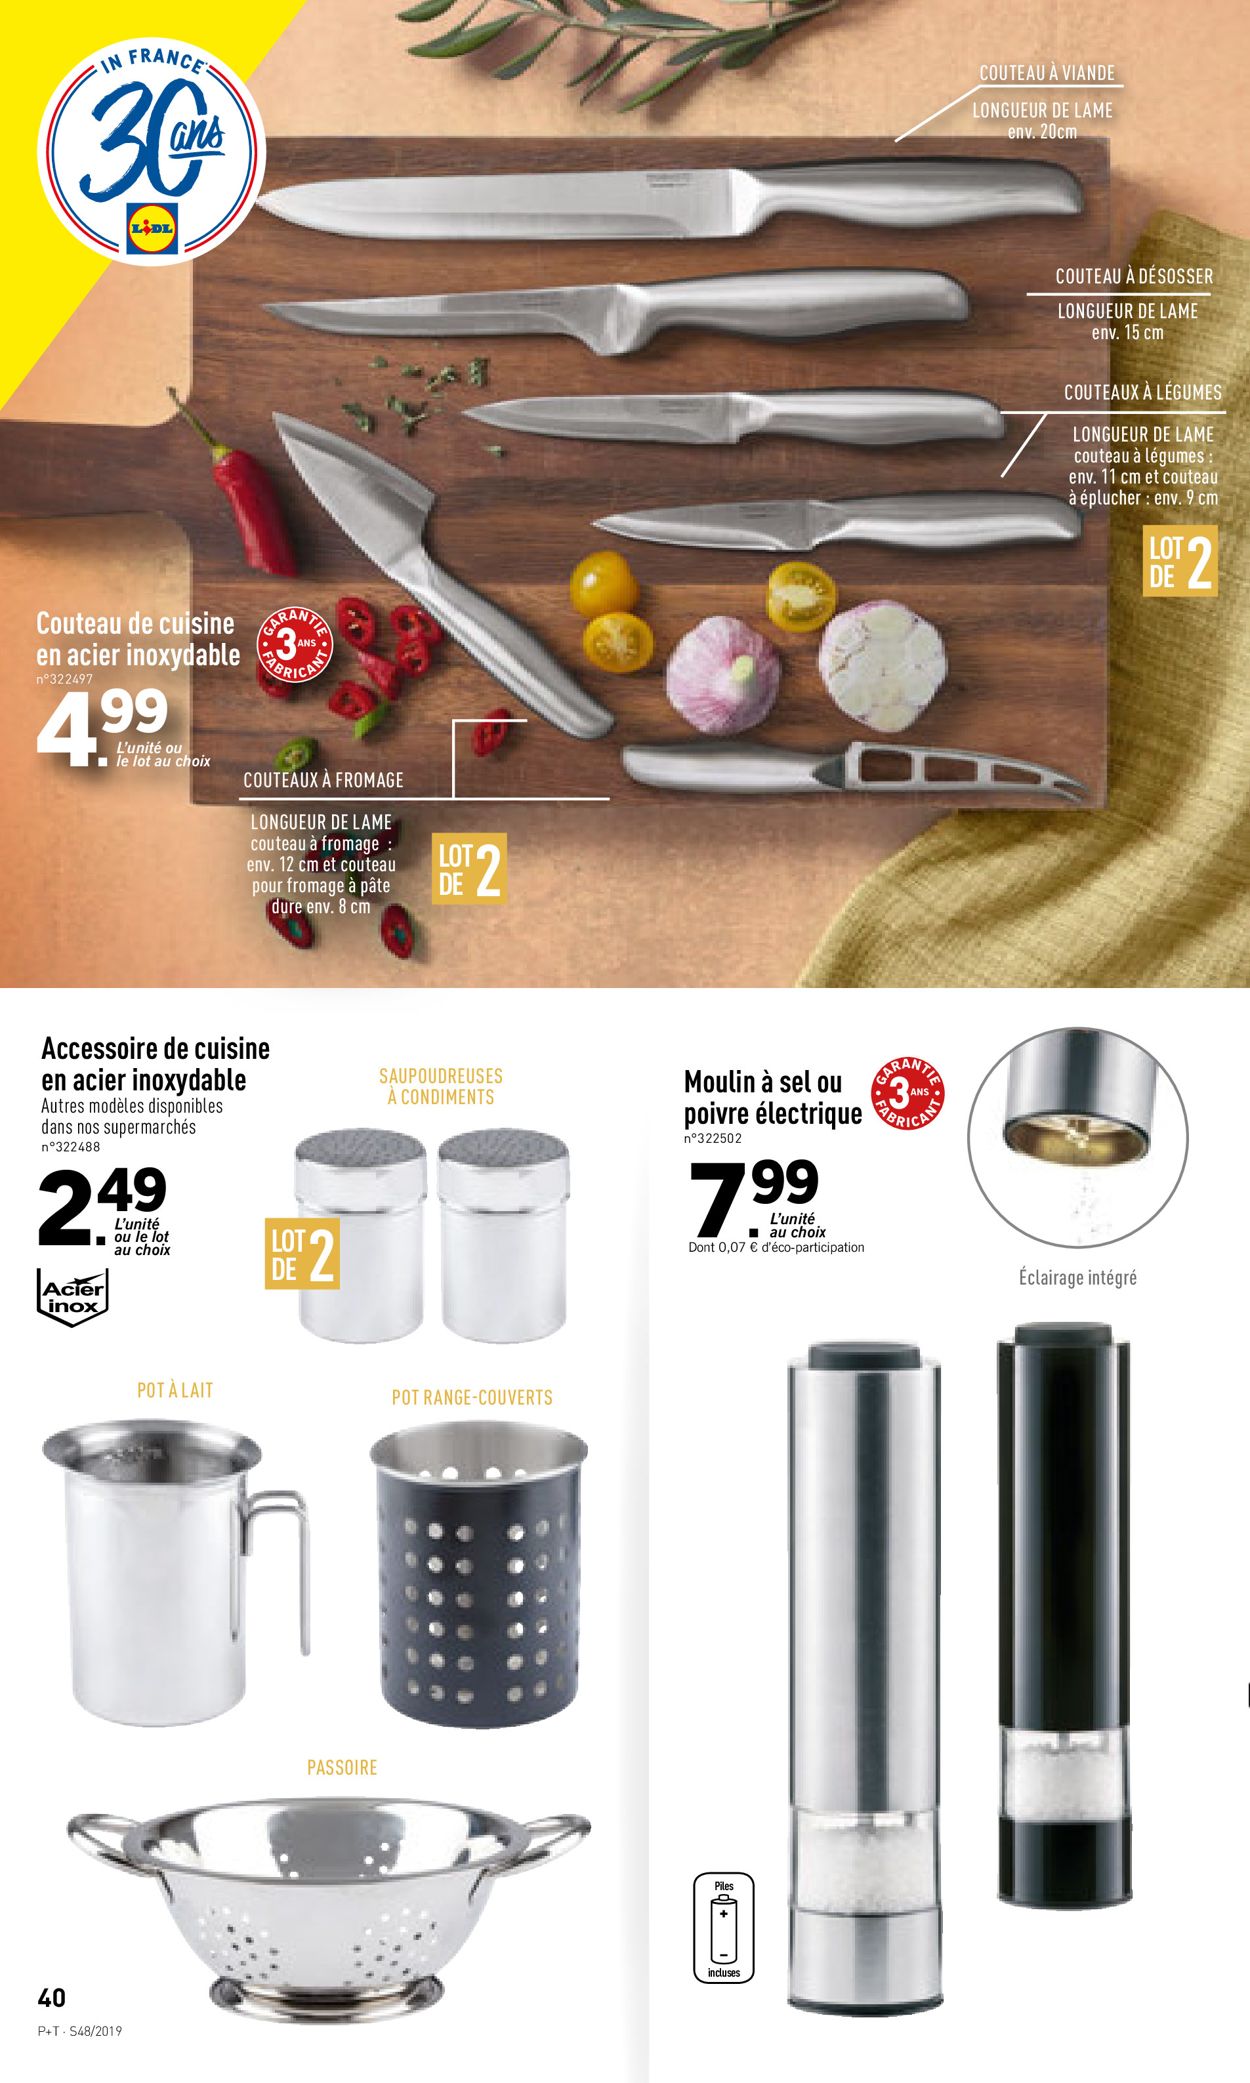 Lidl - BLACK FRIDAY 2019 Catalogue - 27.11-03.12.2019 (Page 40)